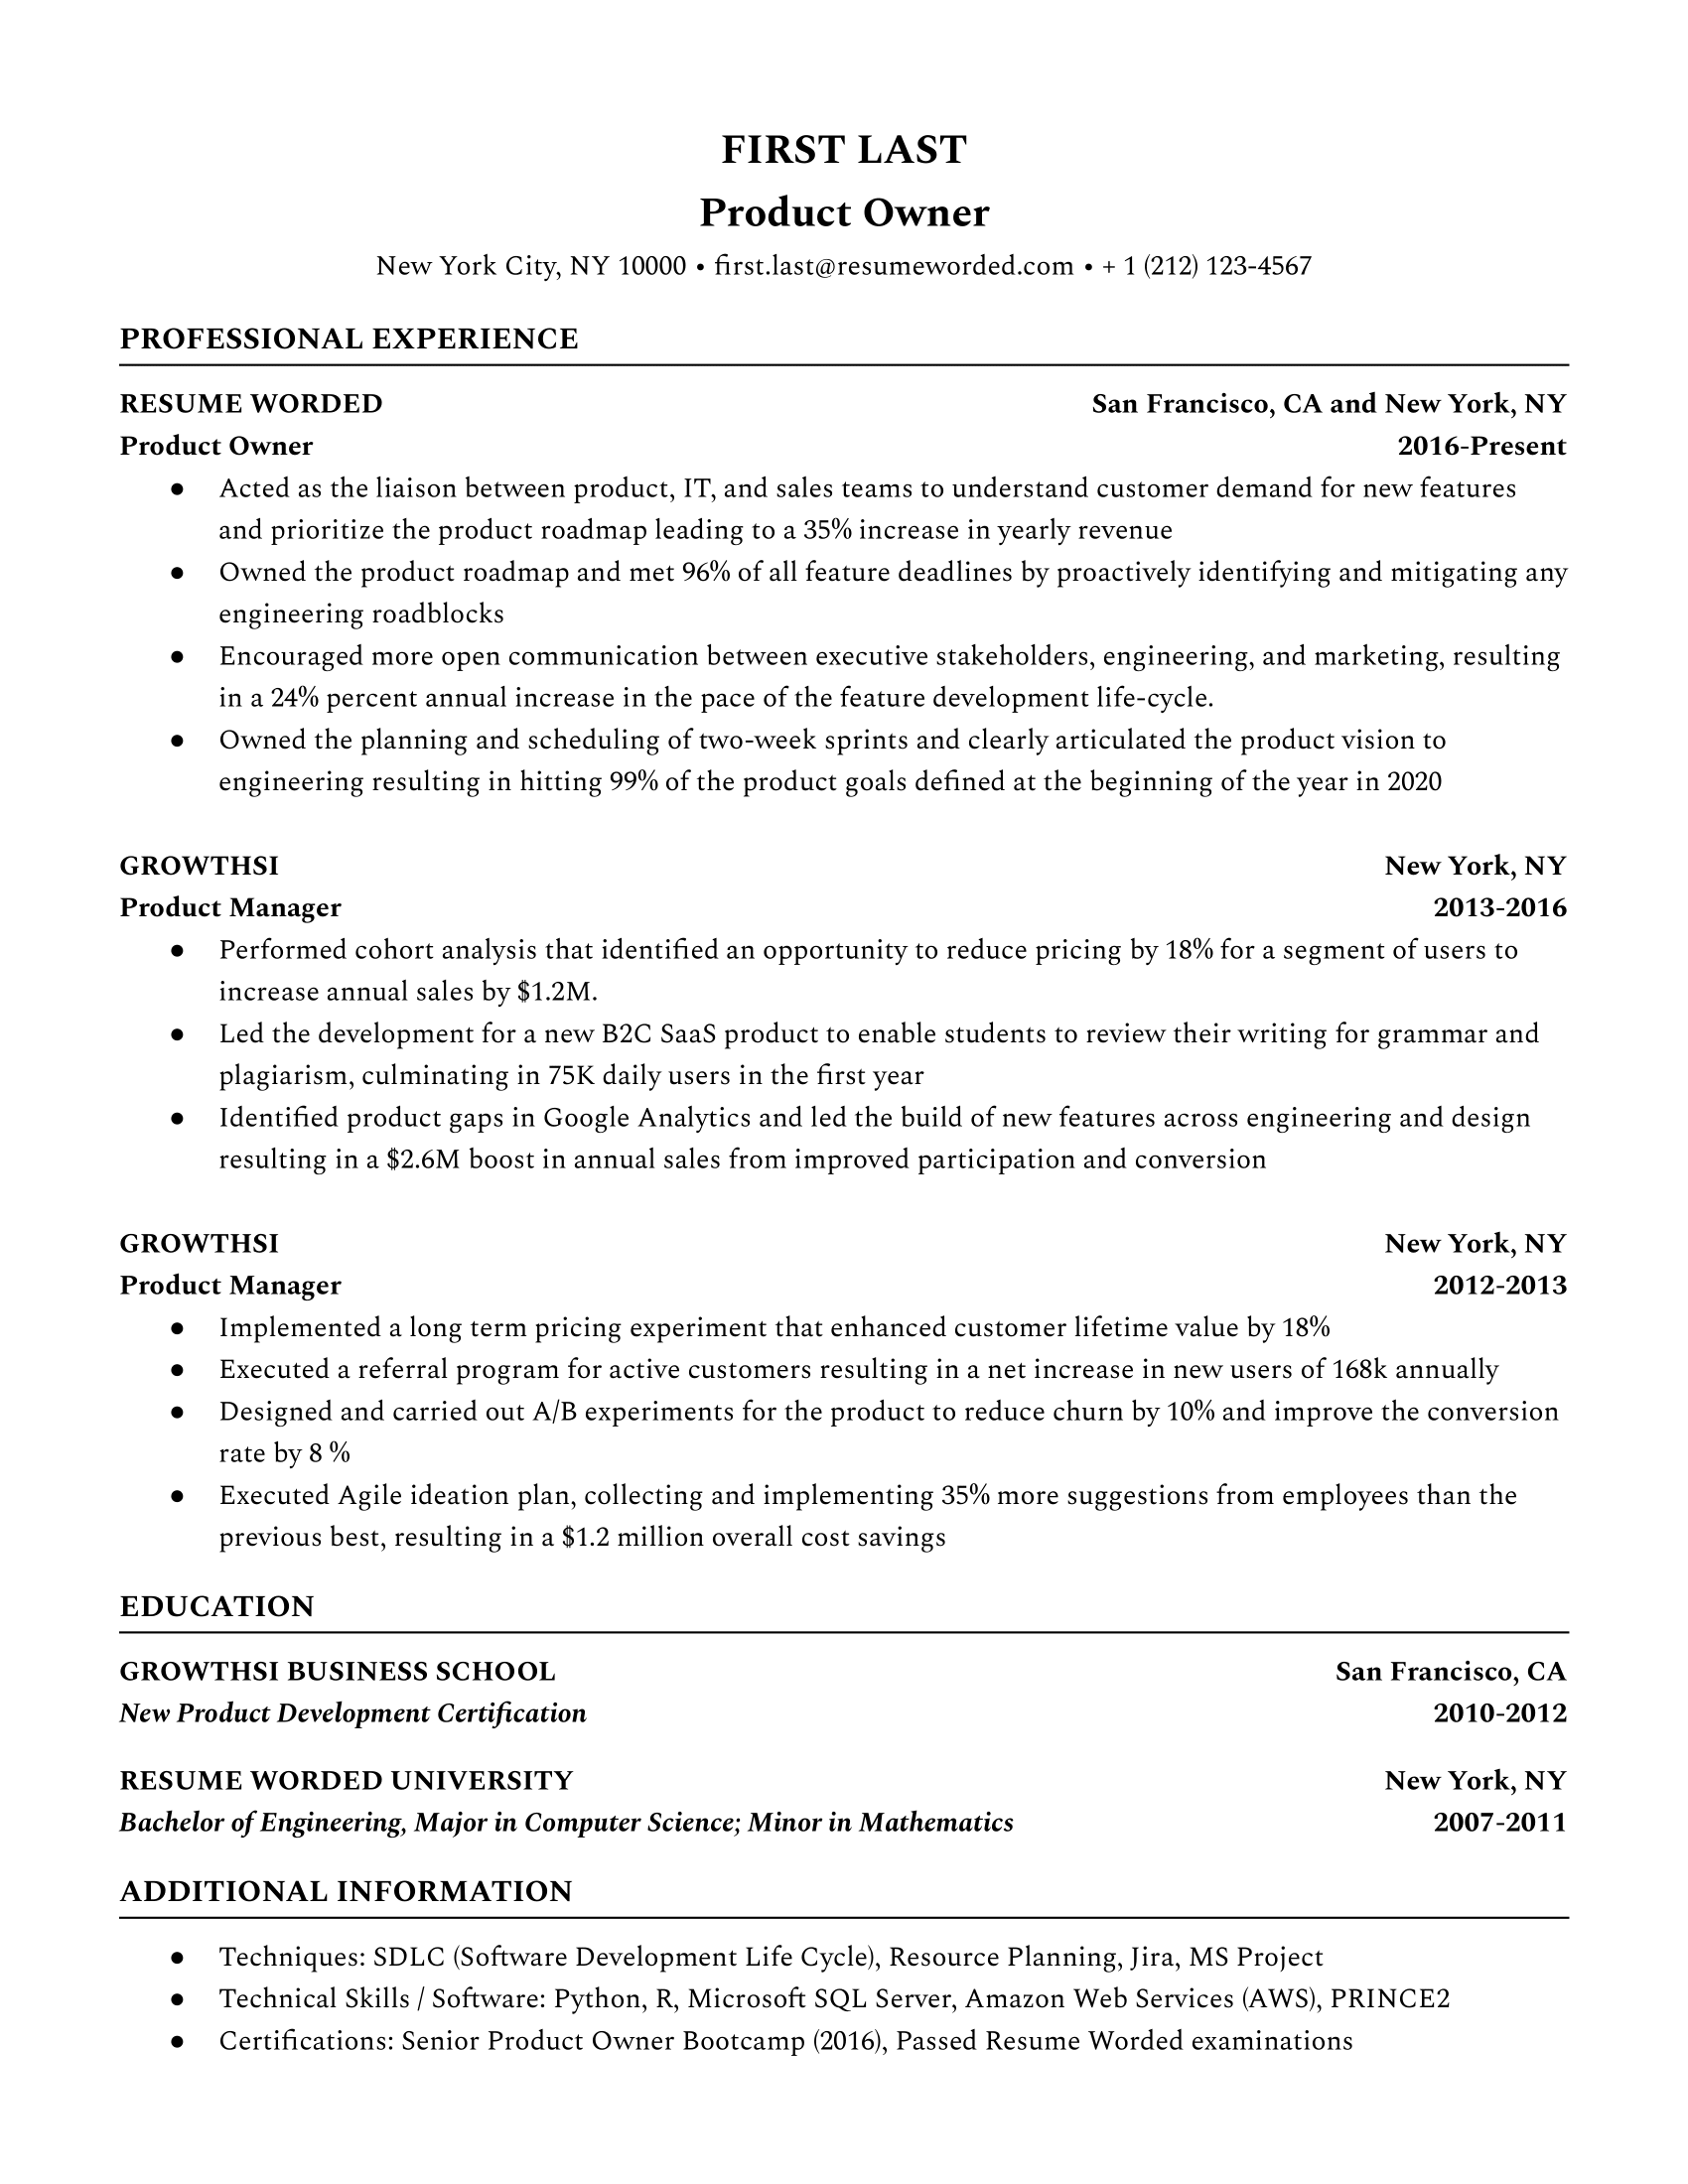 A product owner resume template highlighting scrum skills.